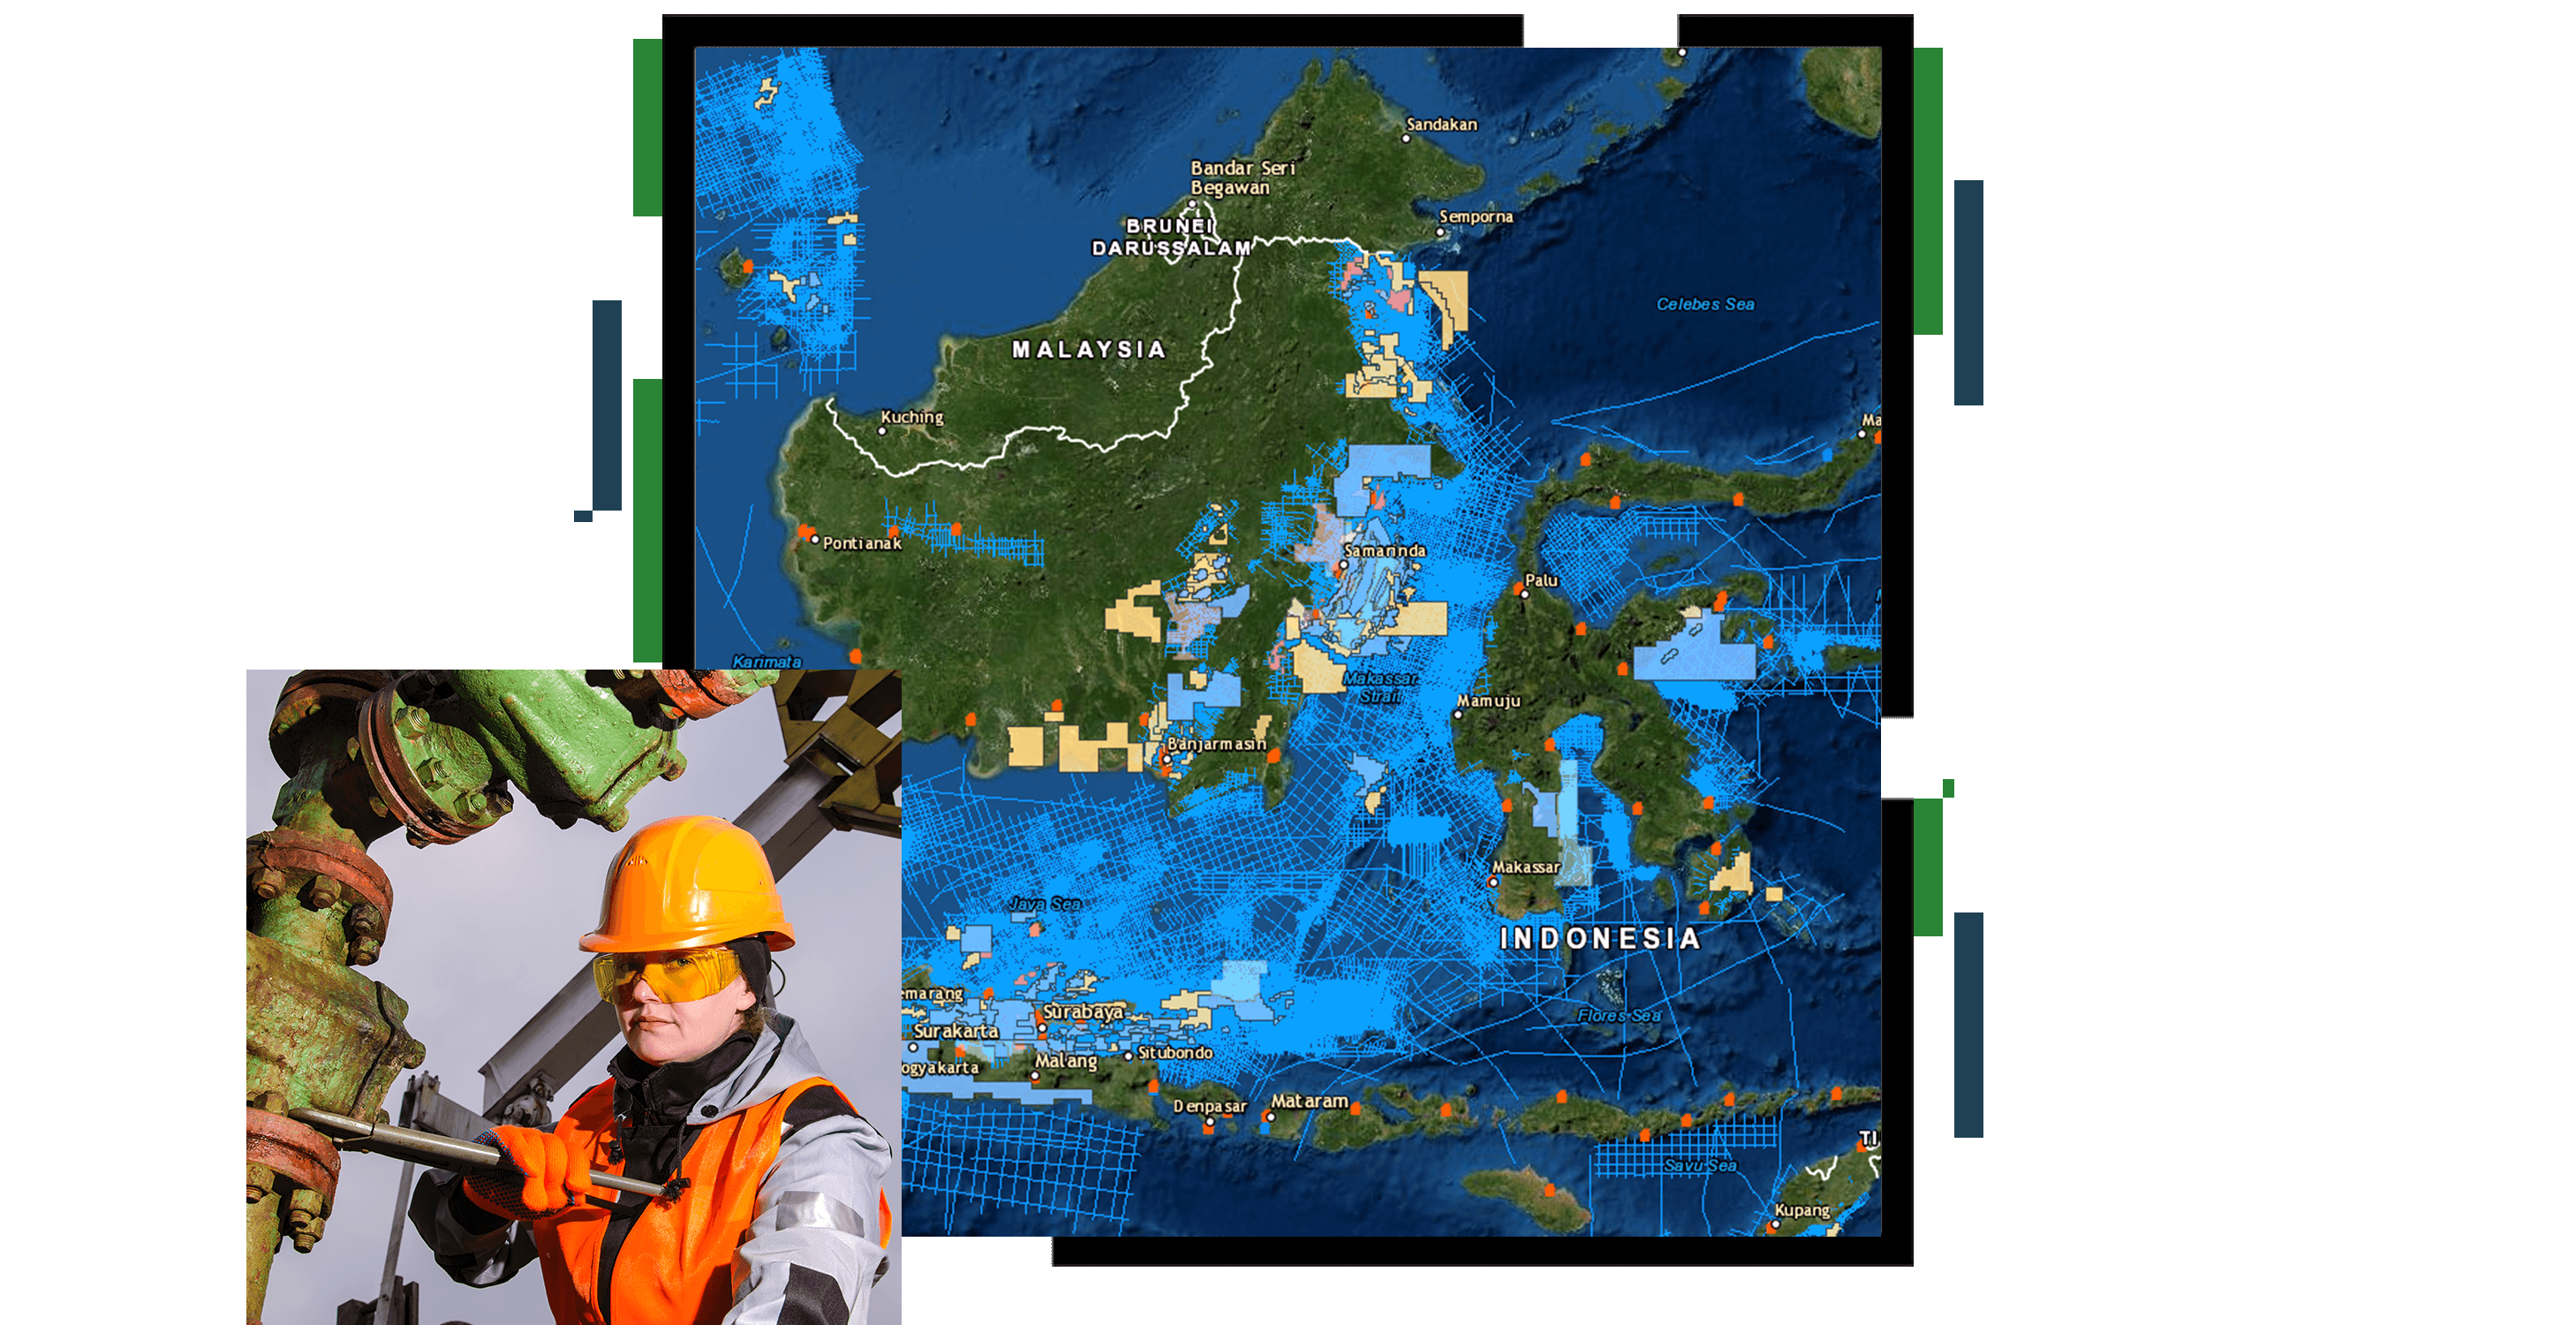 A country map in green on a dark blue ocean beside a photo of a utility worker in a yellow hard hat working on the equipment